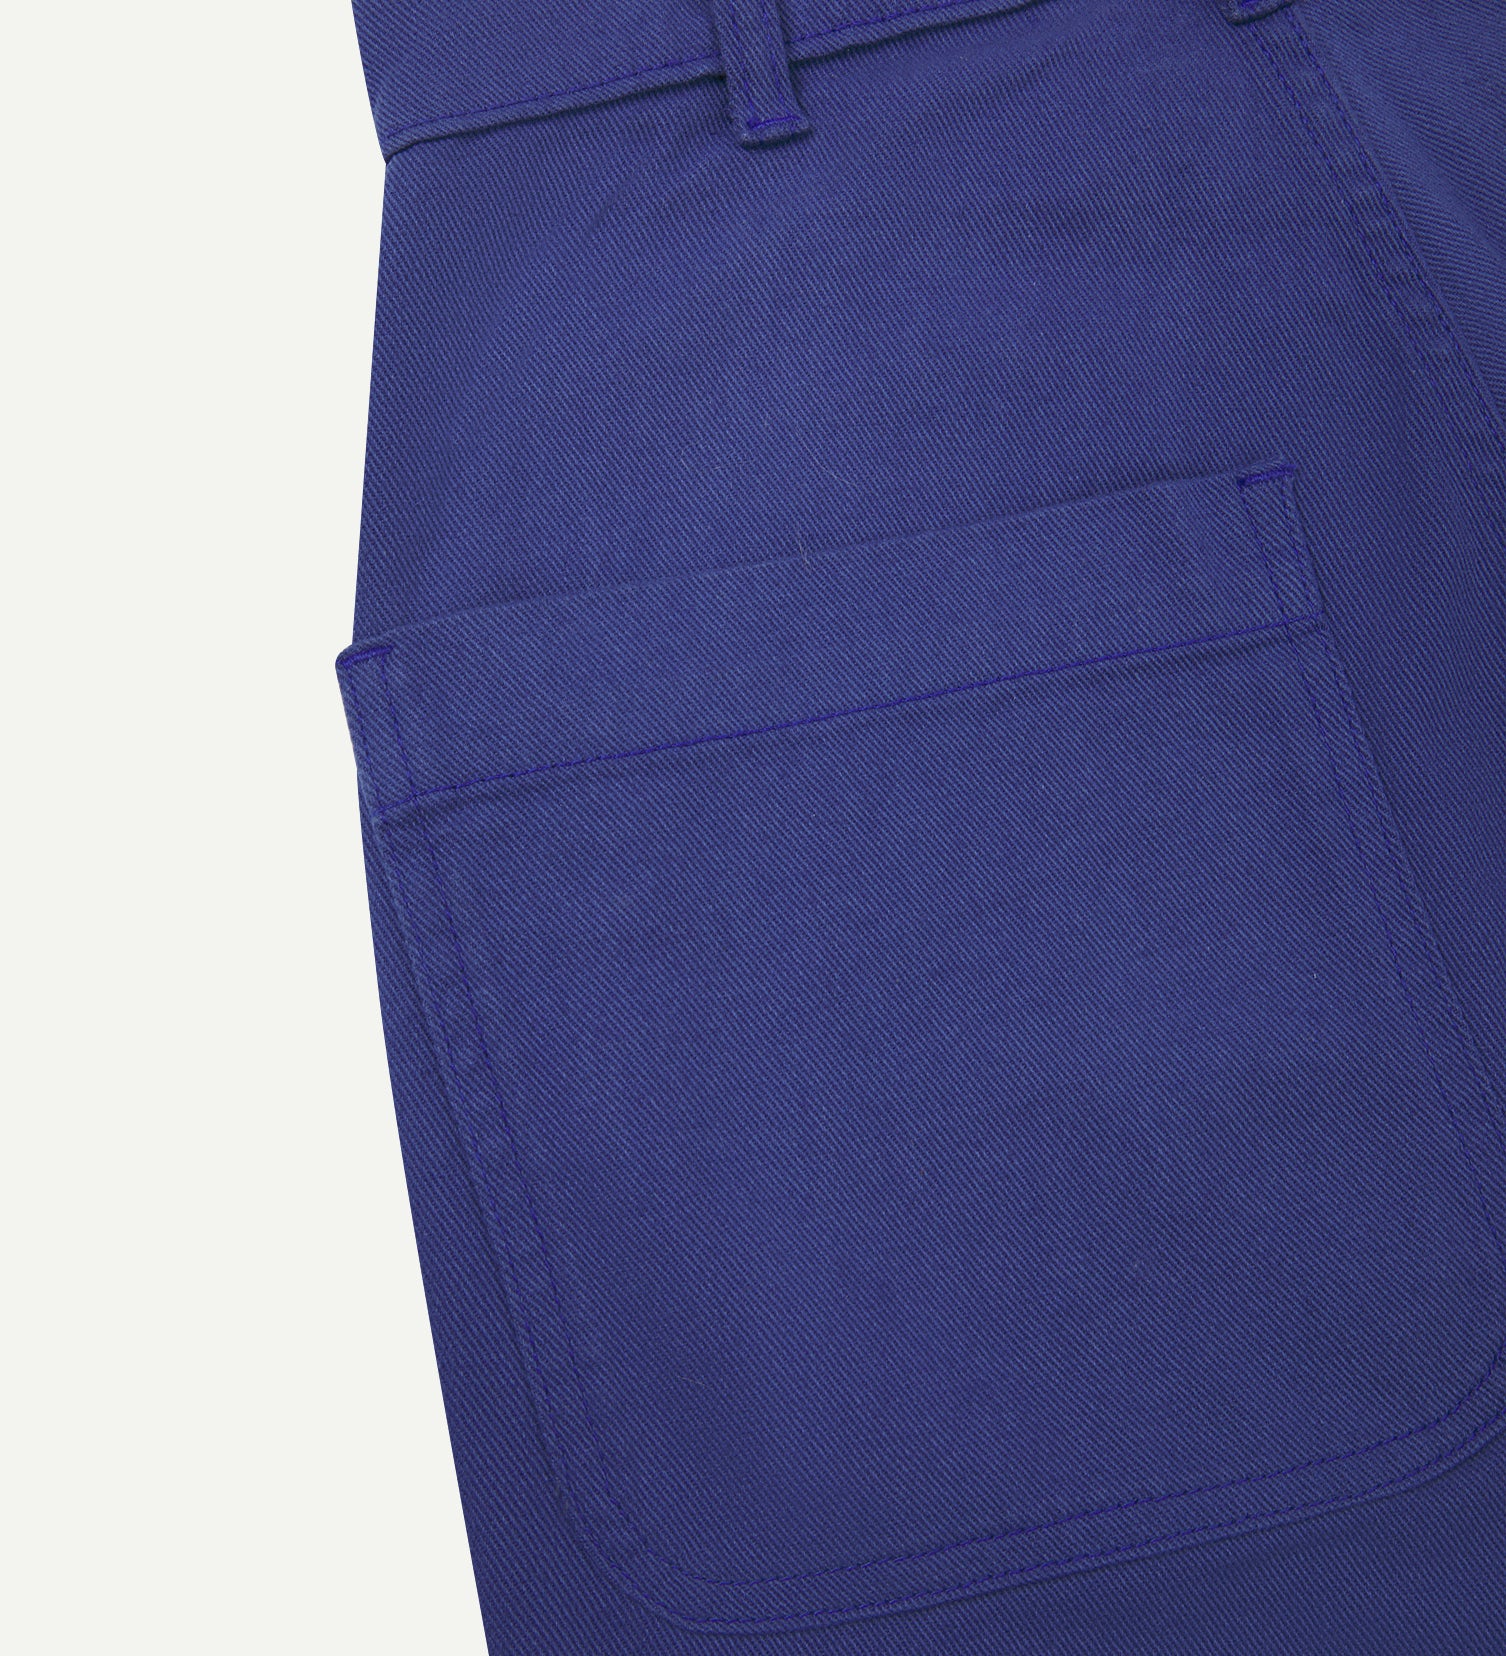 Back close-up view of Uskees cotton drill 'commuter' trousers for men in ultra blue showing belt loops and back pocket.